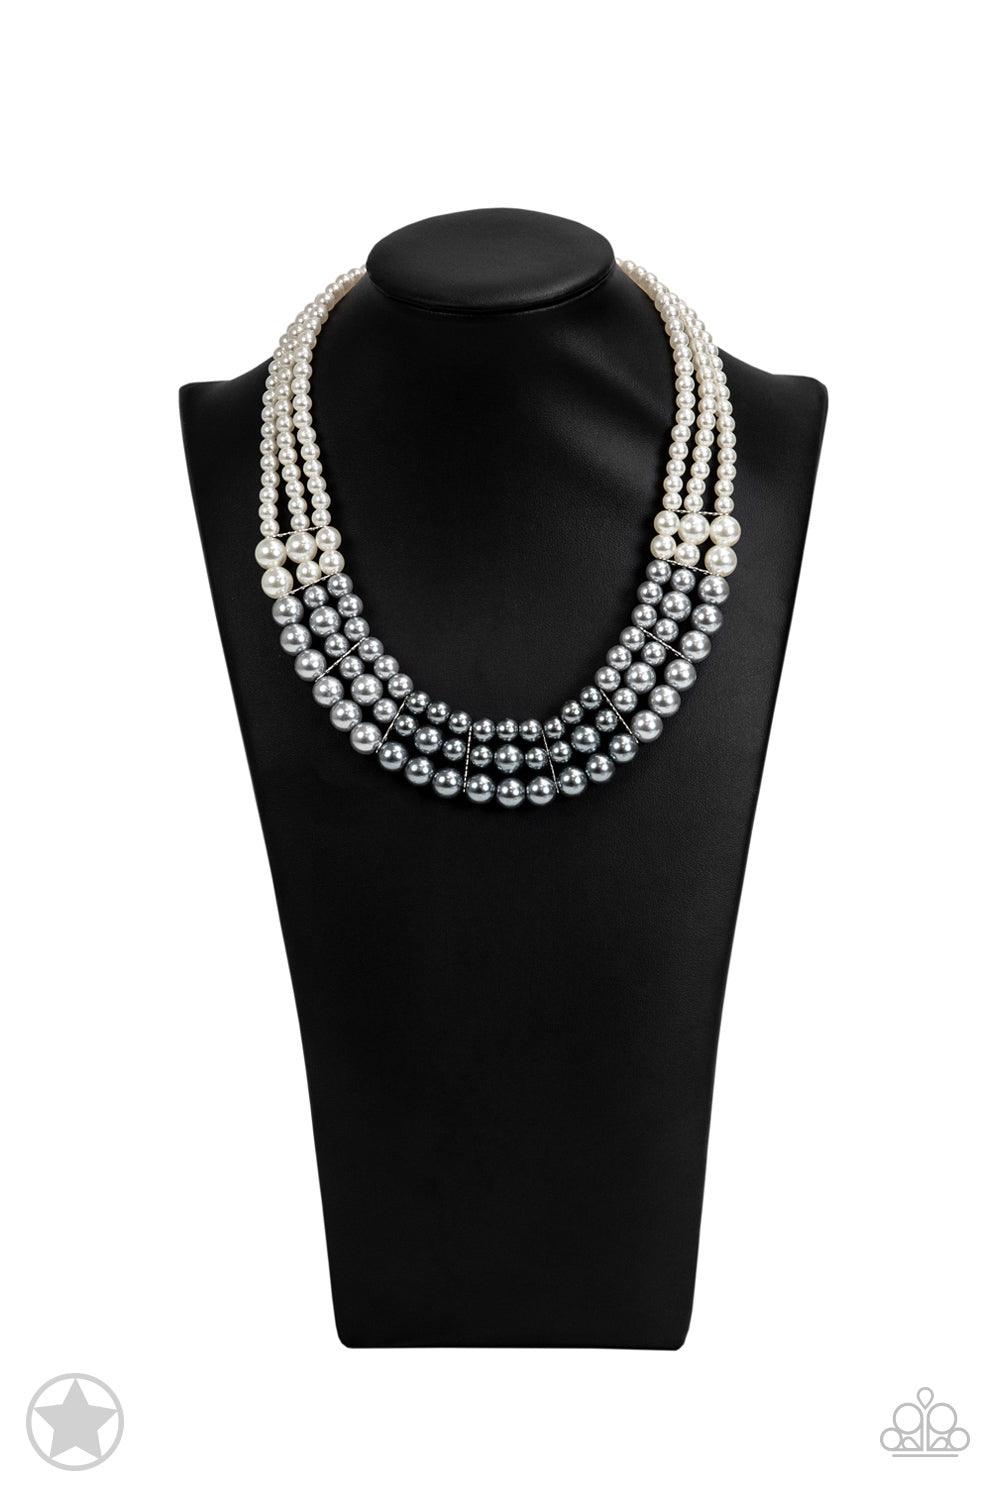 Paparazzi Accessories Lady In Waiting Strands of white, silver, and dark gray pearls elegantly drape below the collar, creating a beautiful ombre effect. Sectioned by silver accents, the luminescent pearls radiantly fall into a glamorous cascade. Features